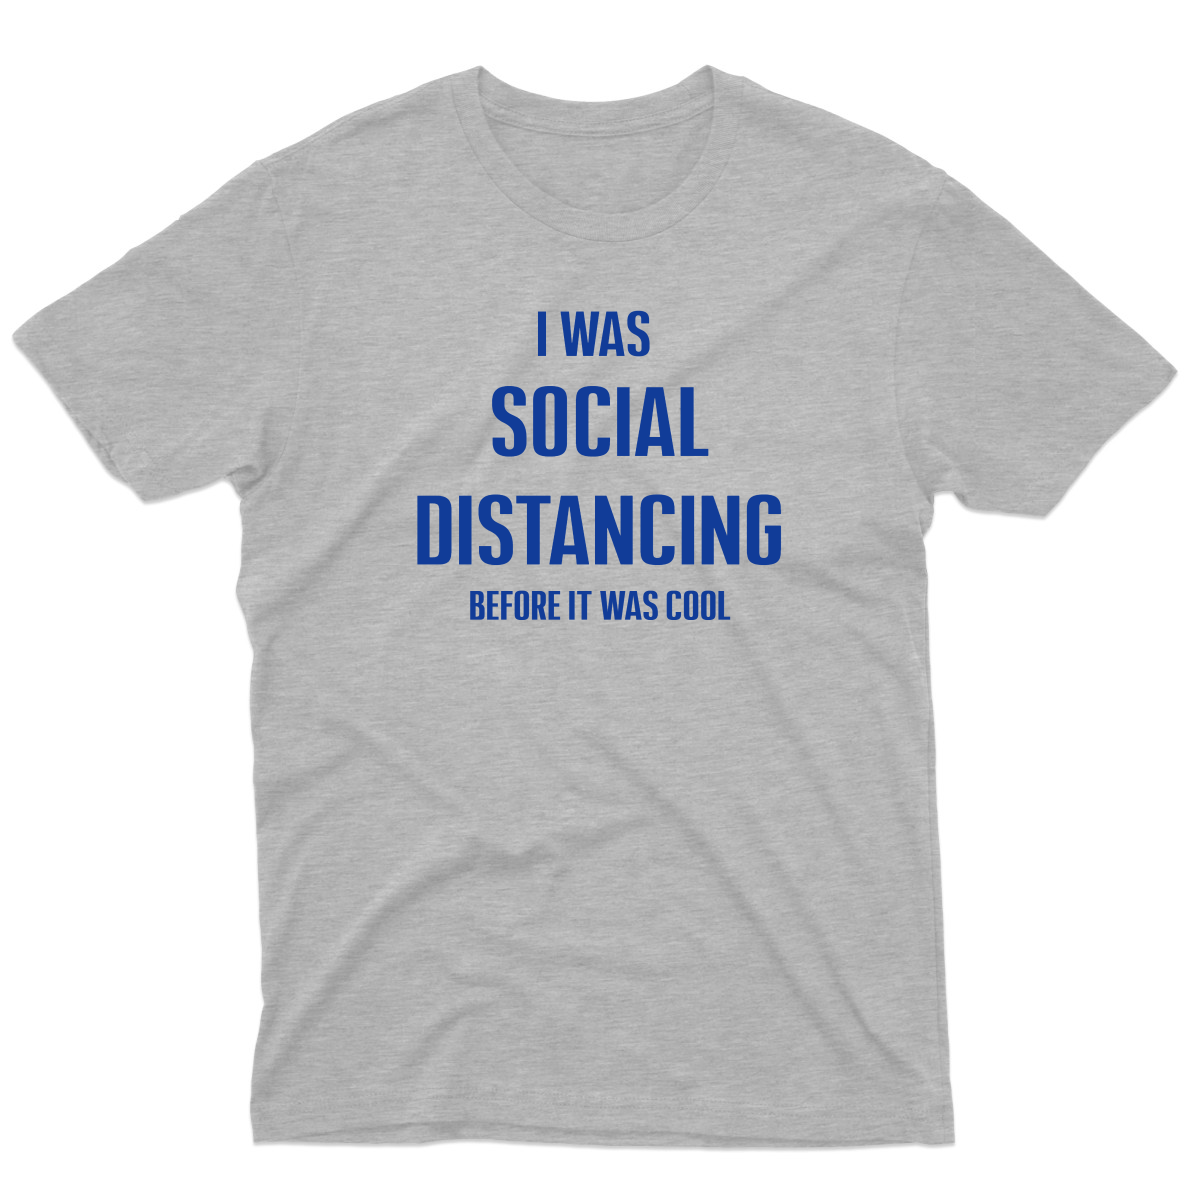 I was social distancing before it was cool Men's T-shirt | Gray